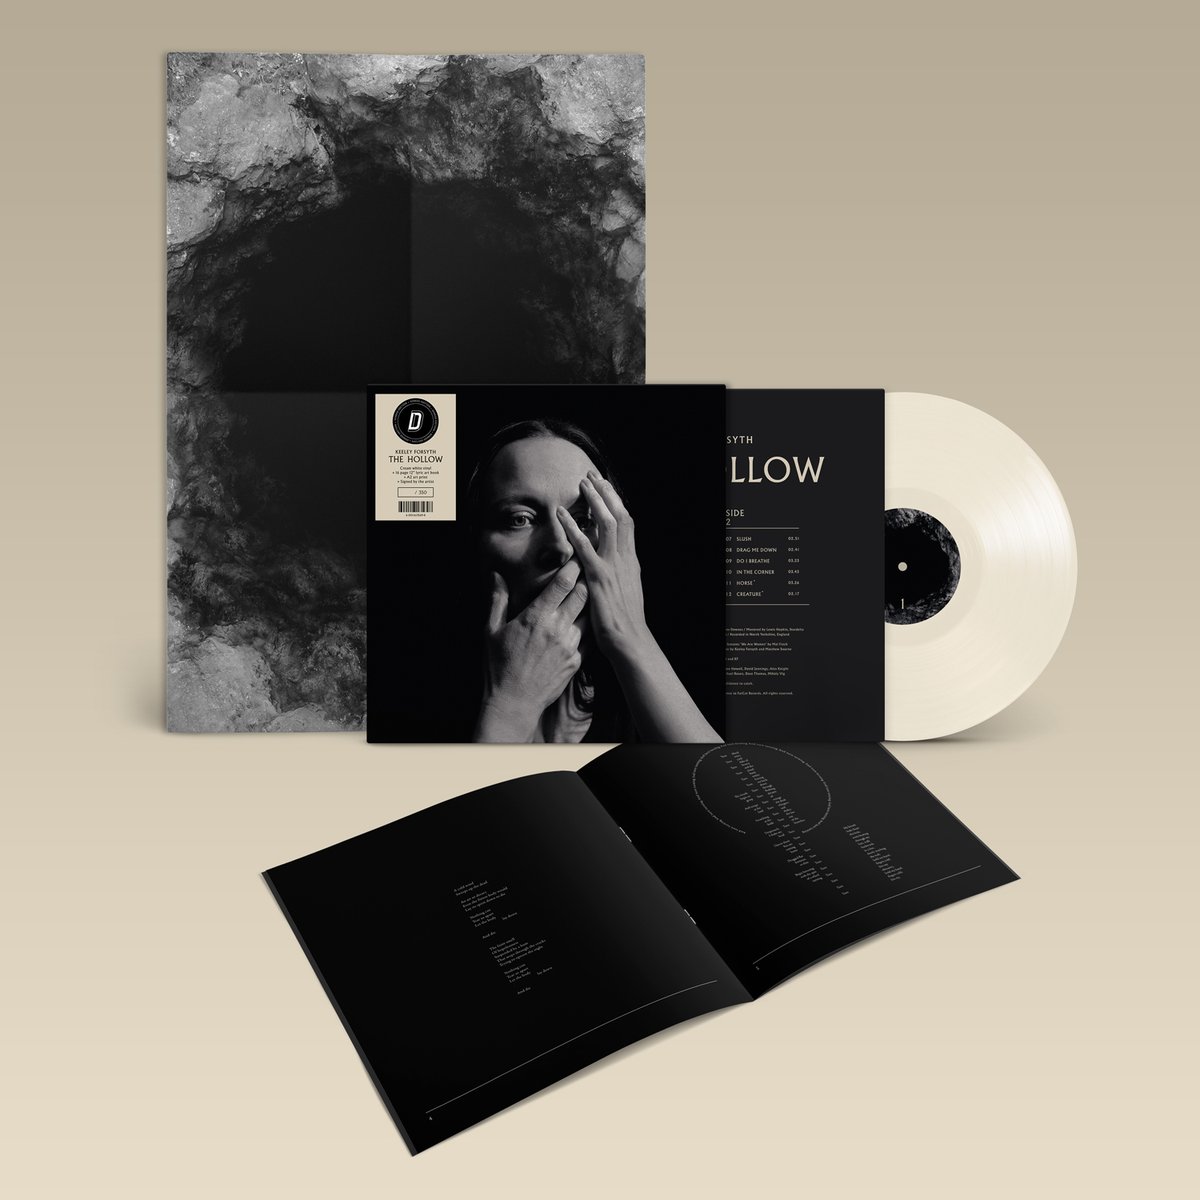 Dinked Edition 284. @KeeleyForsyth - The Hollow. A unique and very special artist, we are all absolutely thrilled to work with Keeley again following on from her stunning 2022 album, Limbs. + Dinked Edition 284 + @FatCatRecords / 130701 + Cream white coloured vinyl * + A2…